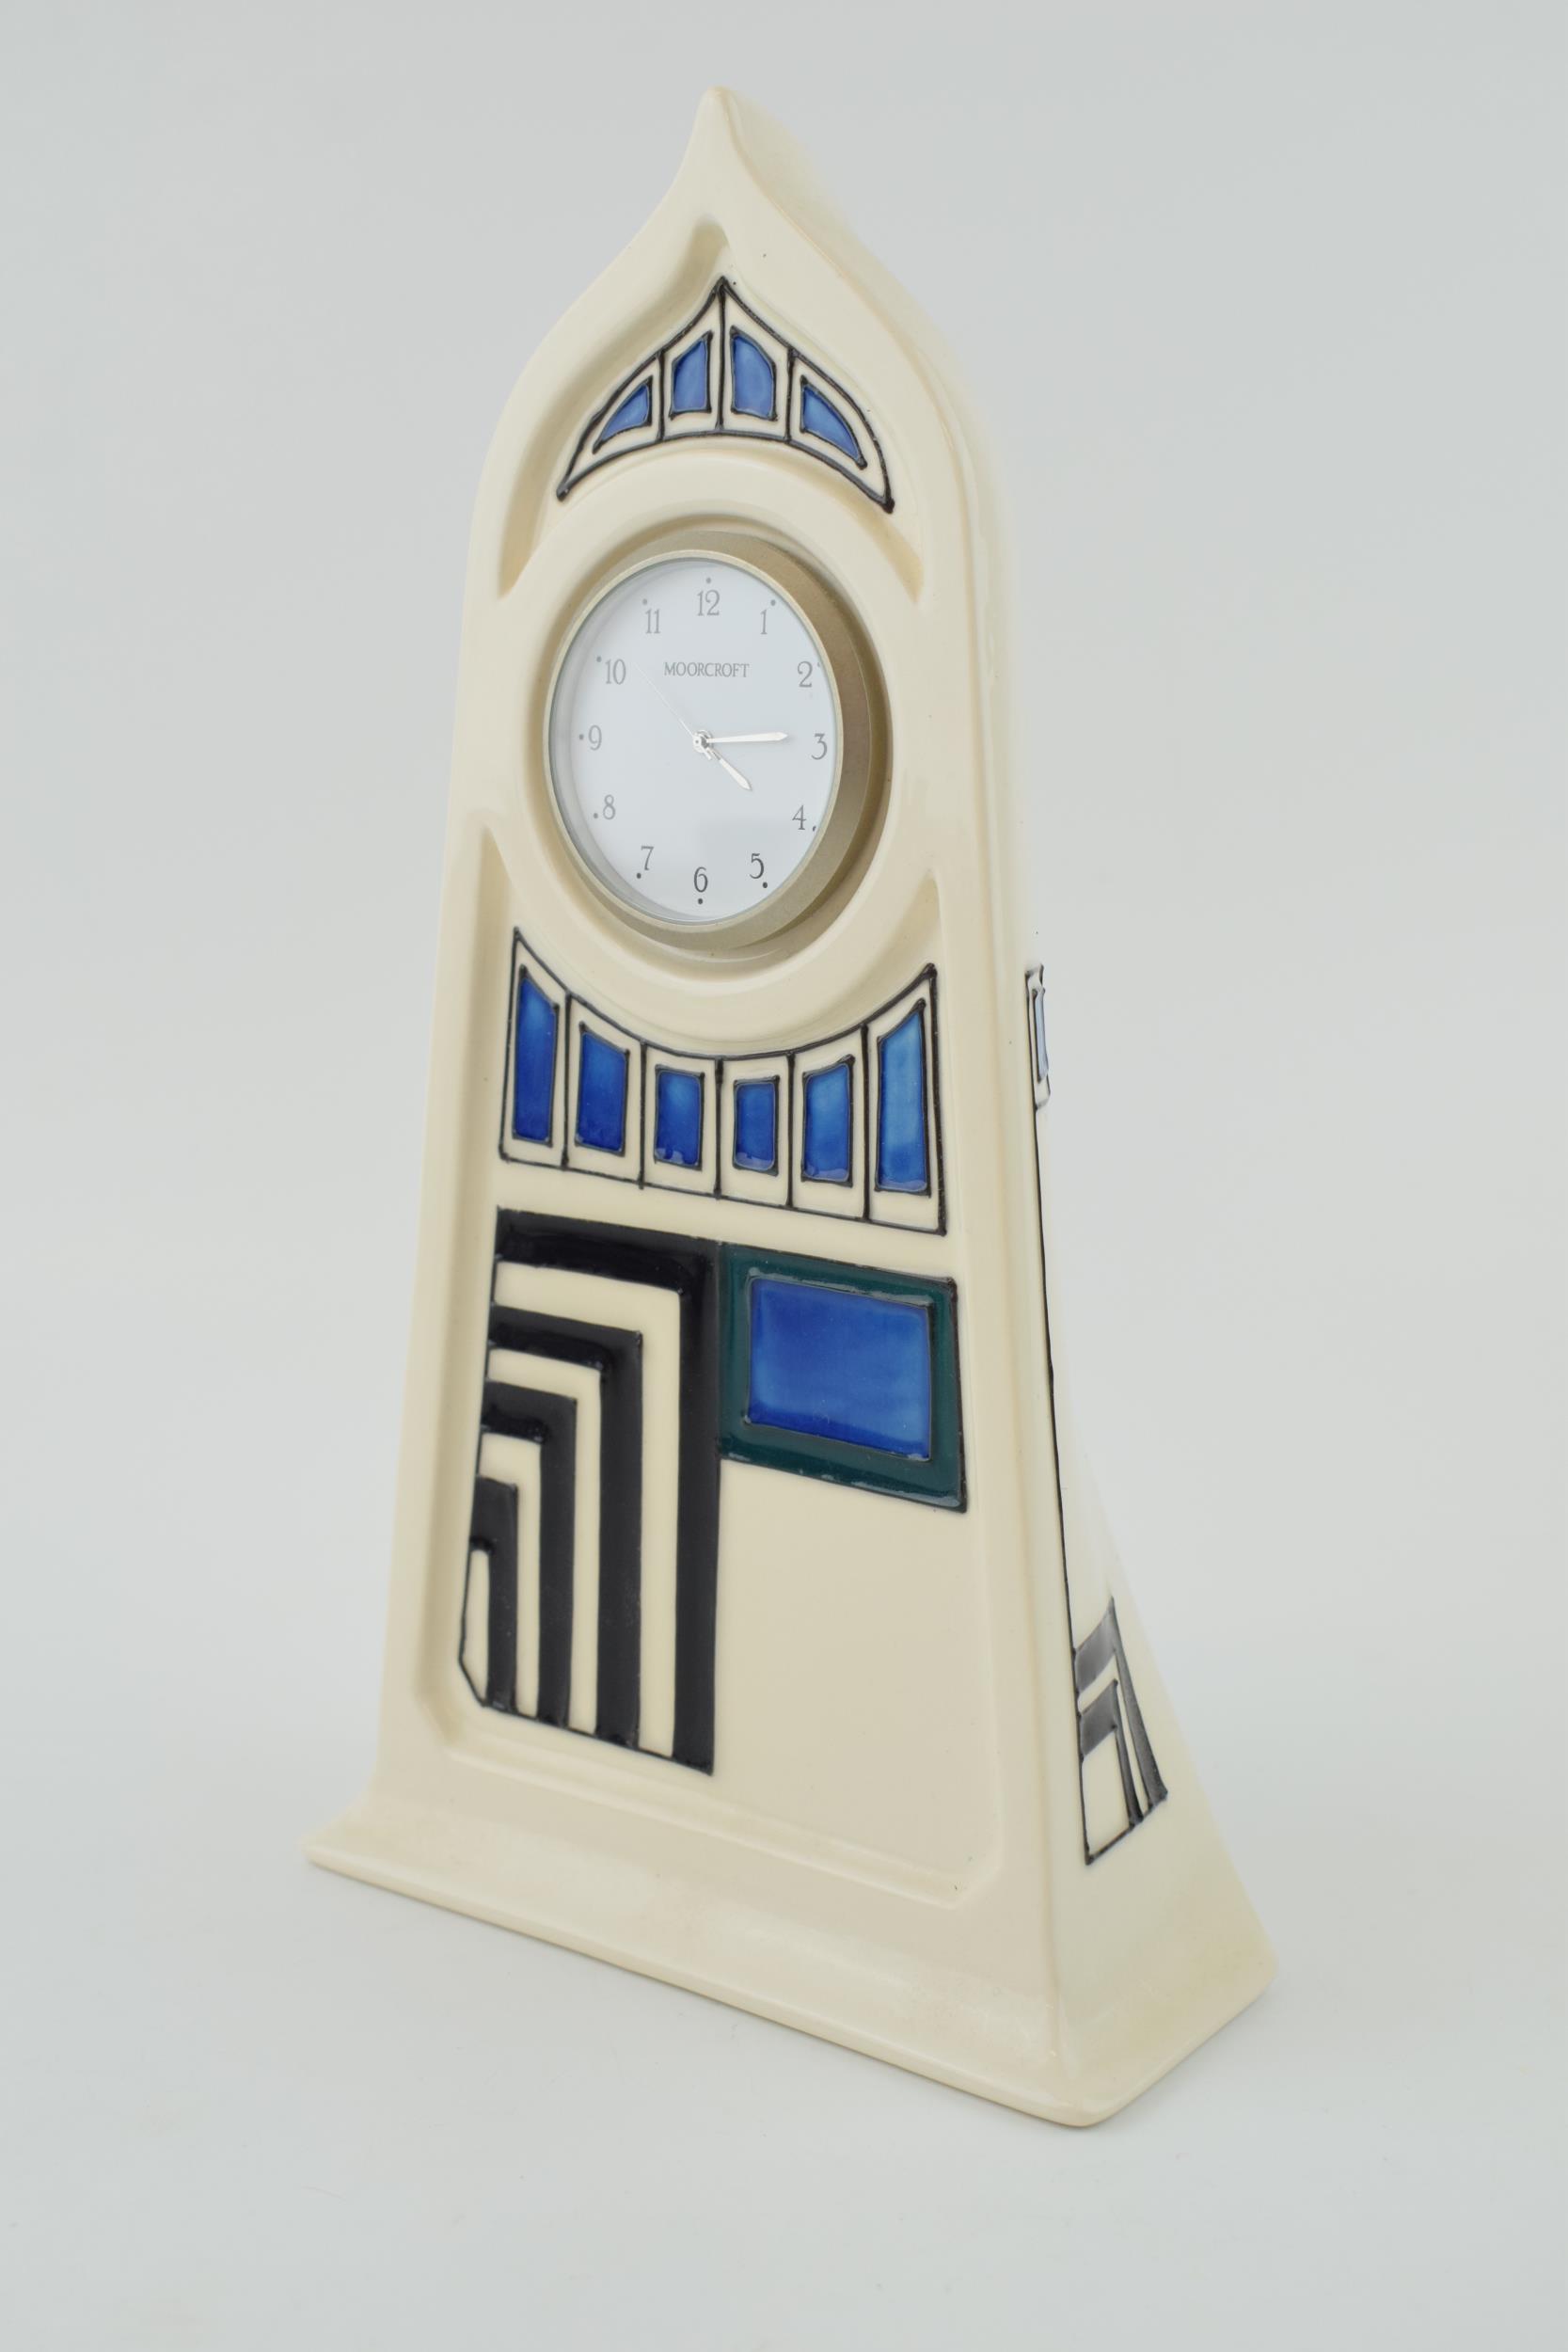 Moorcroft Mackintosh style derngate mantle clock, 23cm tall. In good condition with no obvious - Bild 2 aus 4